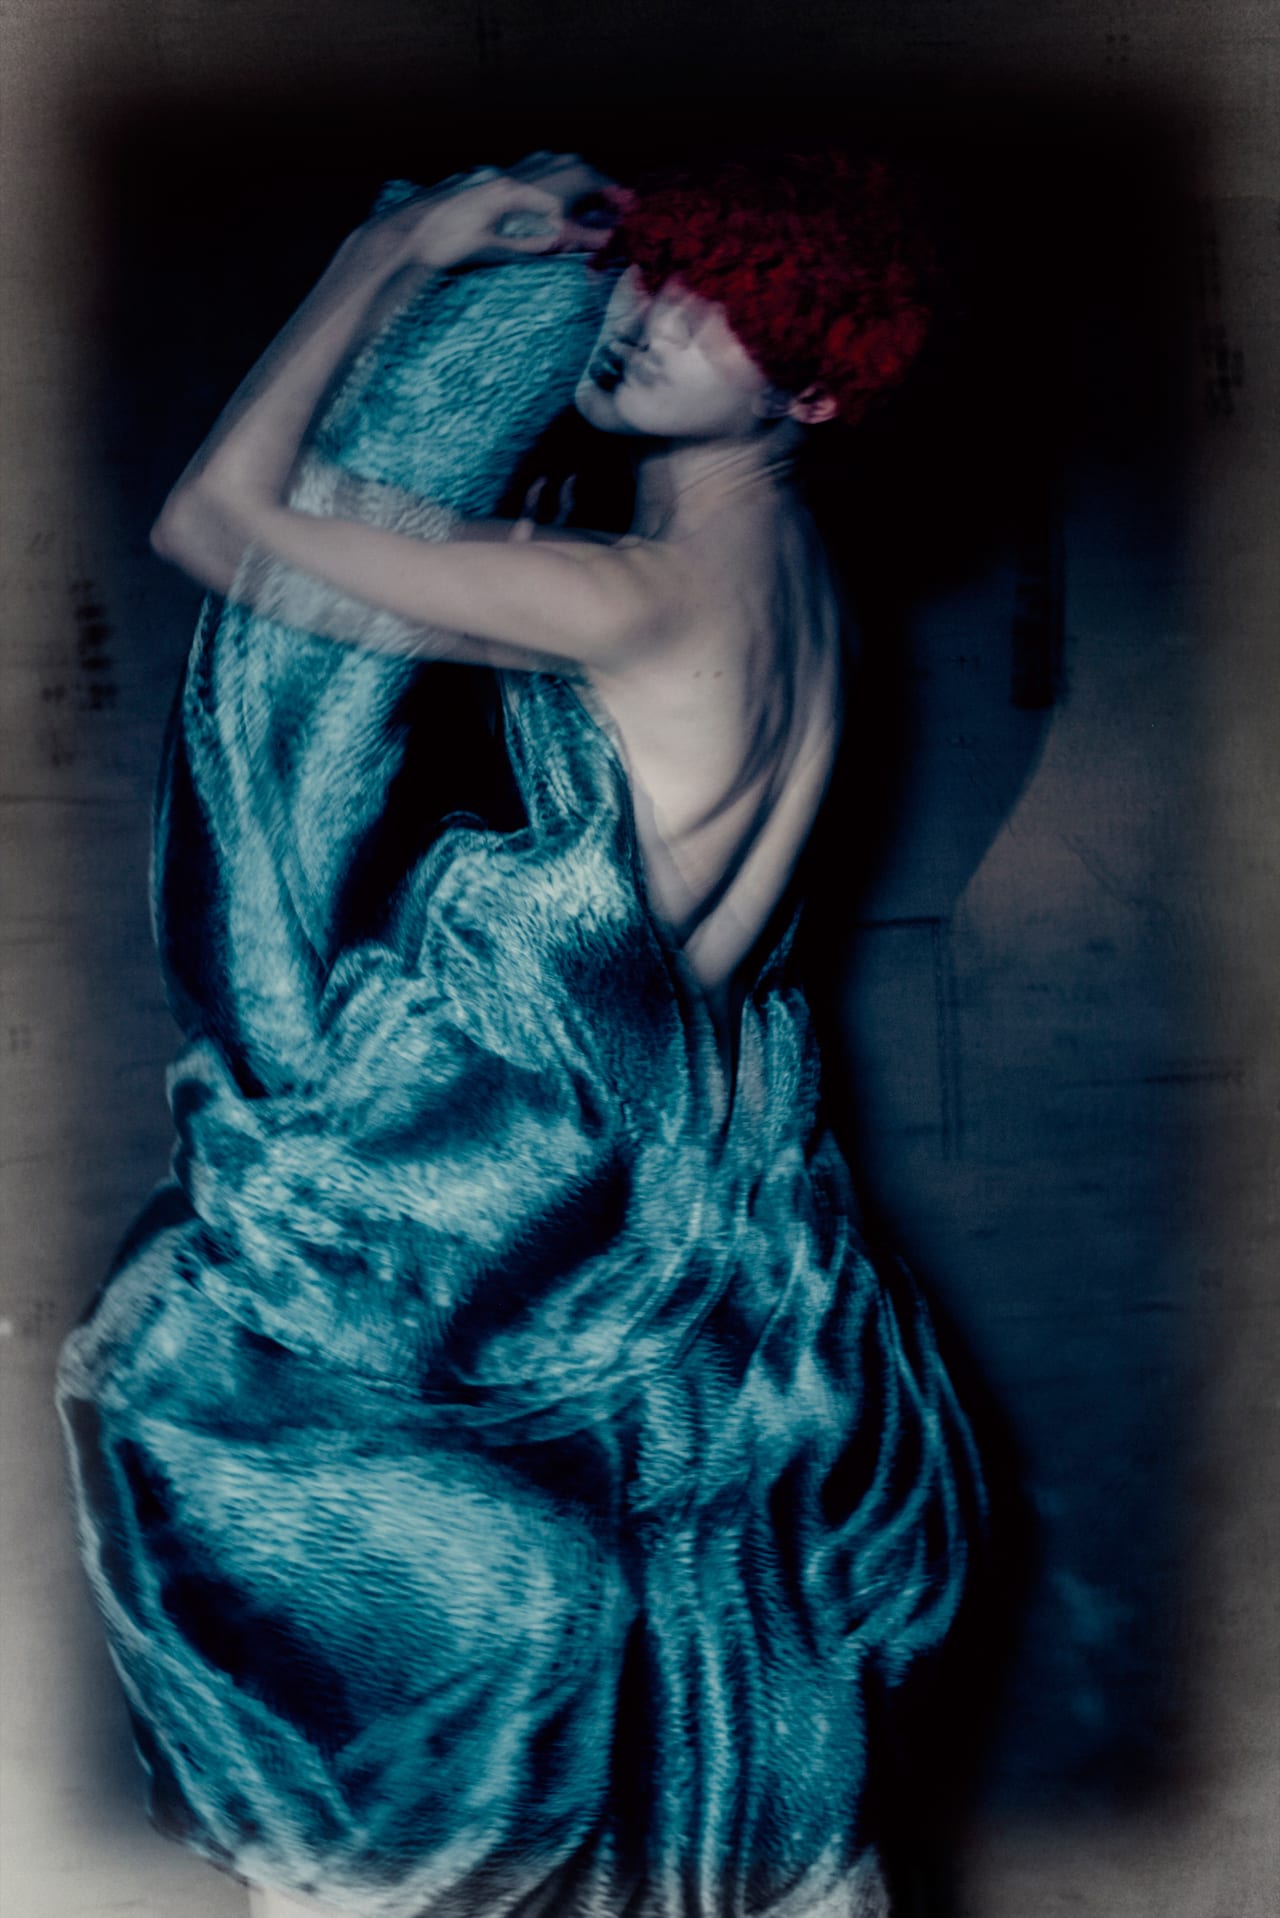 The feeling for light - Paolo Roversi on photography - 1854 Photography